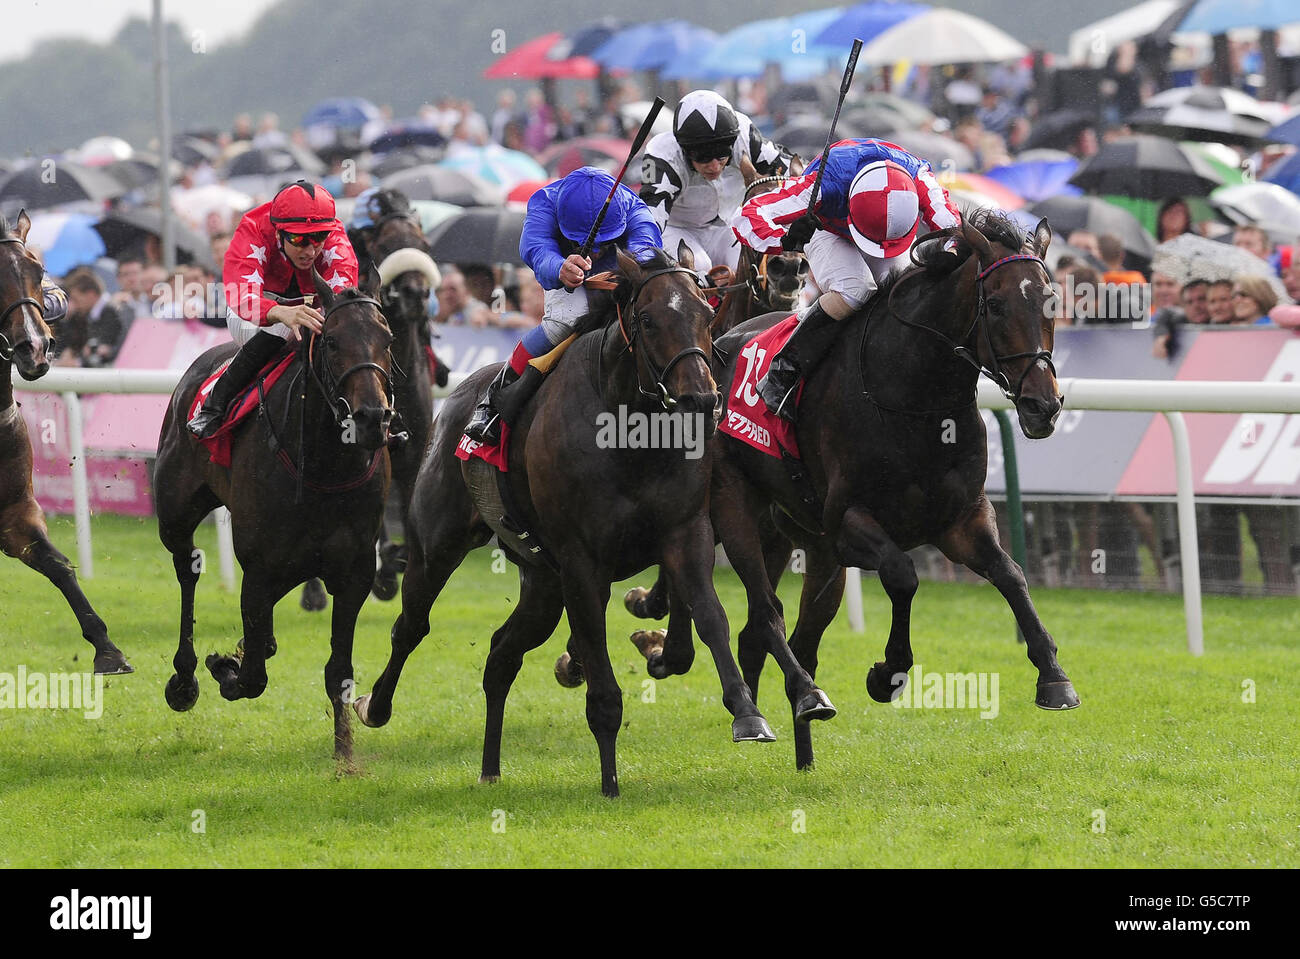 Frankie Dettori and Winning Foe (centre) narrowly defeat Royal Diamond and Nial McCullagh in the Betfred Ebor Handicap during day four of the 2012 Ebor Festival at York Racecourse. Stock Photo